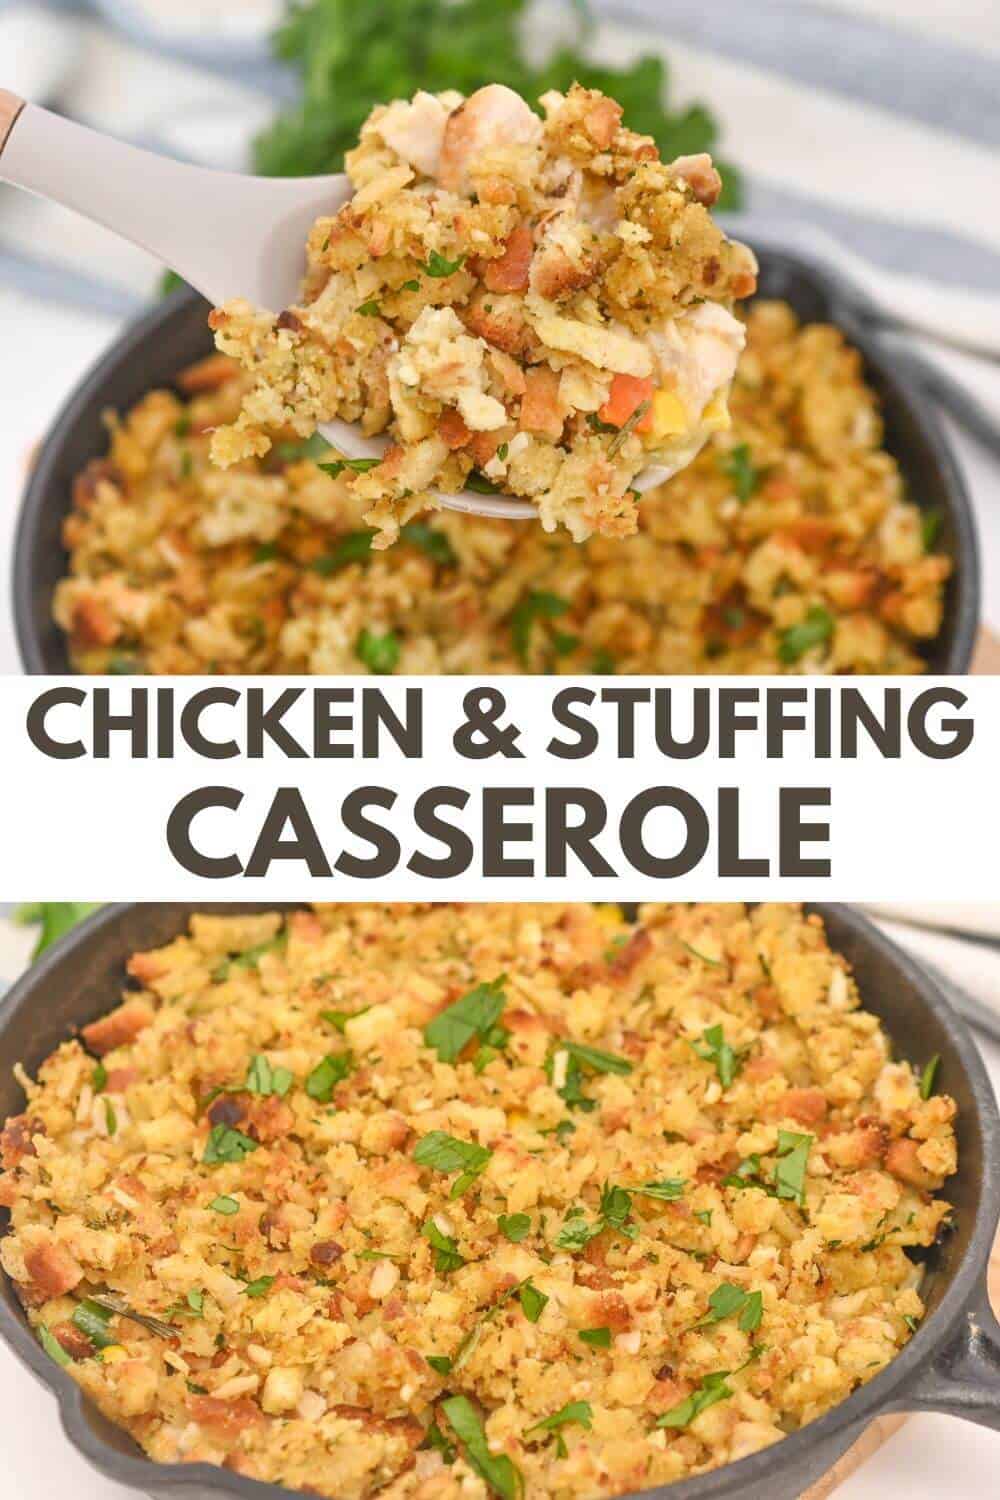 Chicken and stuffing casserole in a skillet.